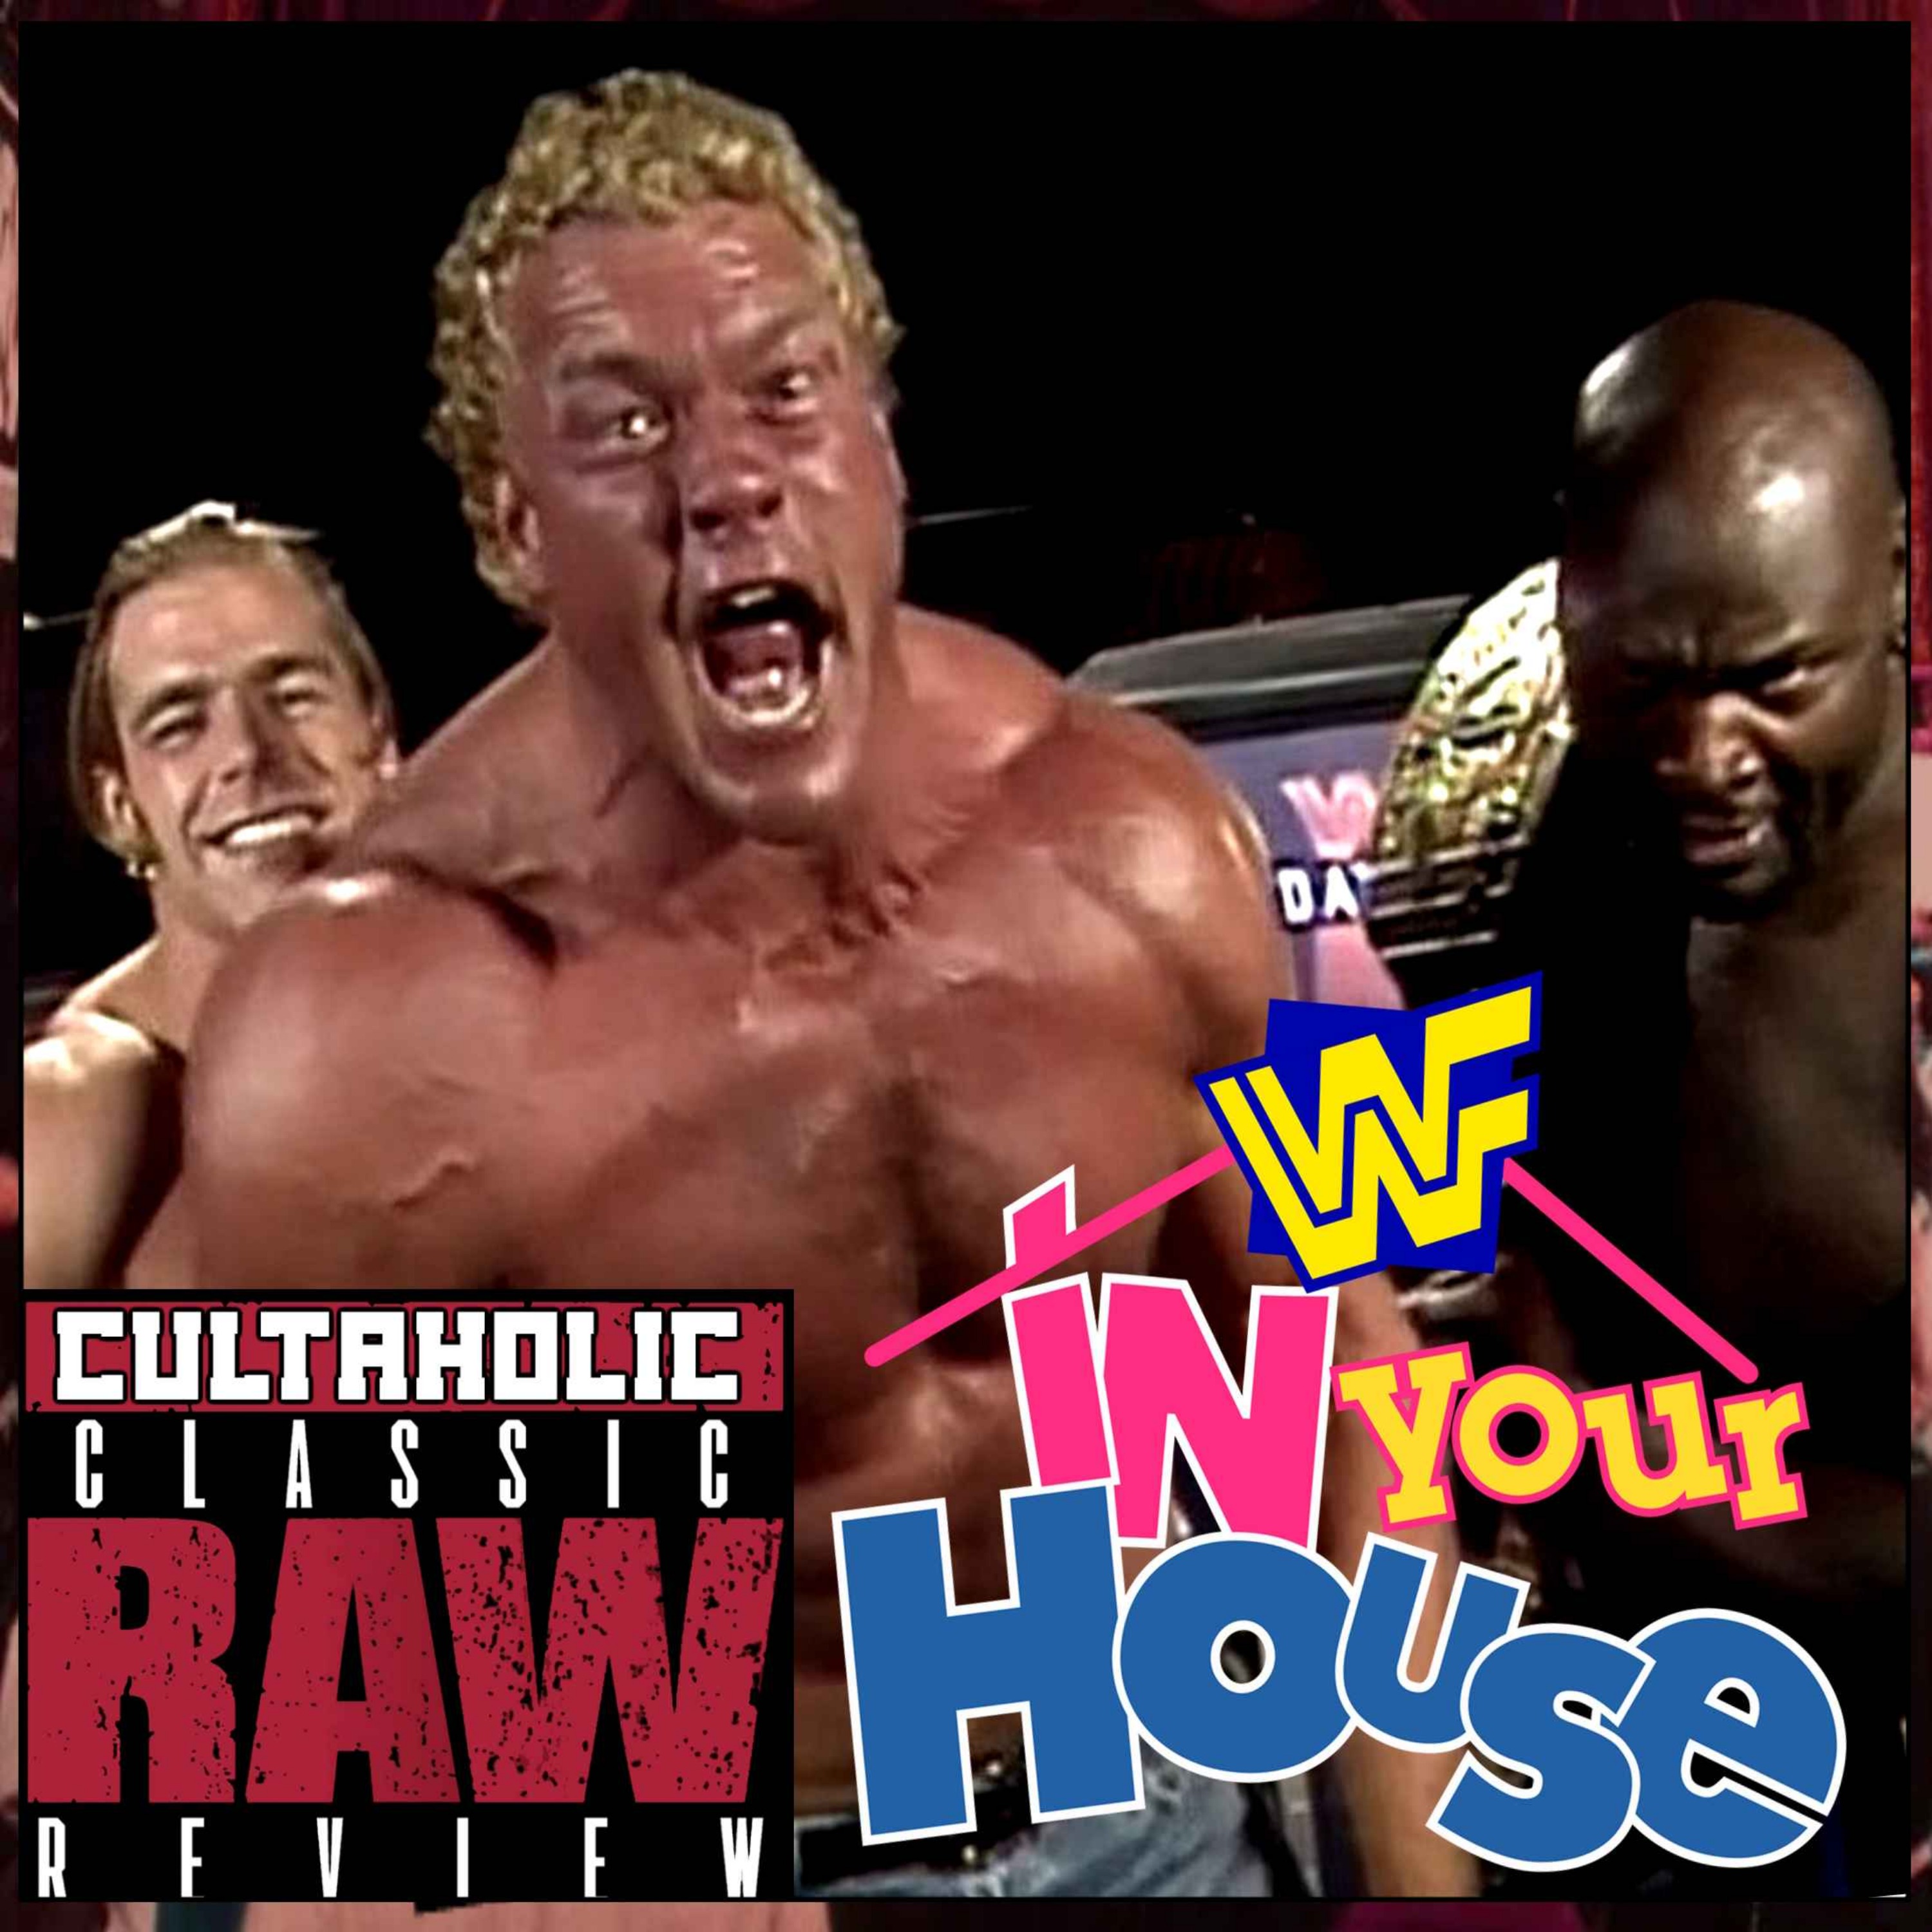 WWE In Your House: INTERNATIONAL INCIDENT (Sid, Shawn And Ahmed vs Bulldog, Owen and Vader)